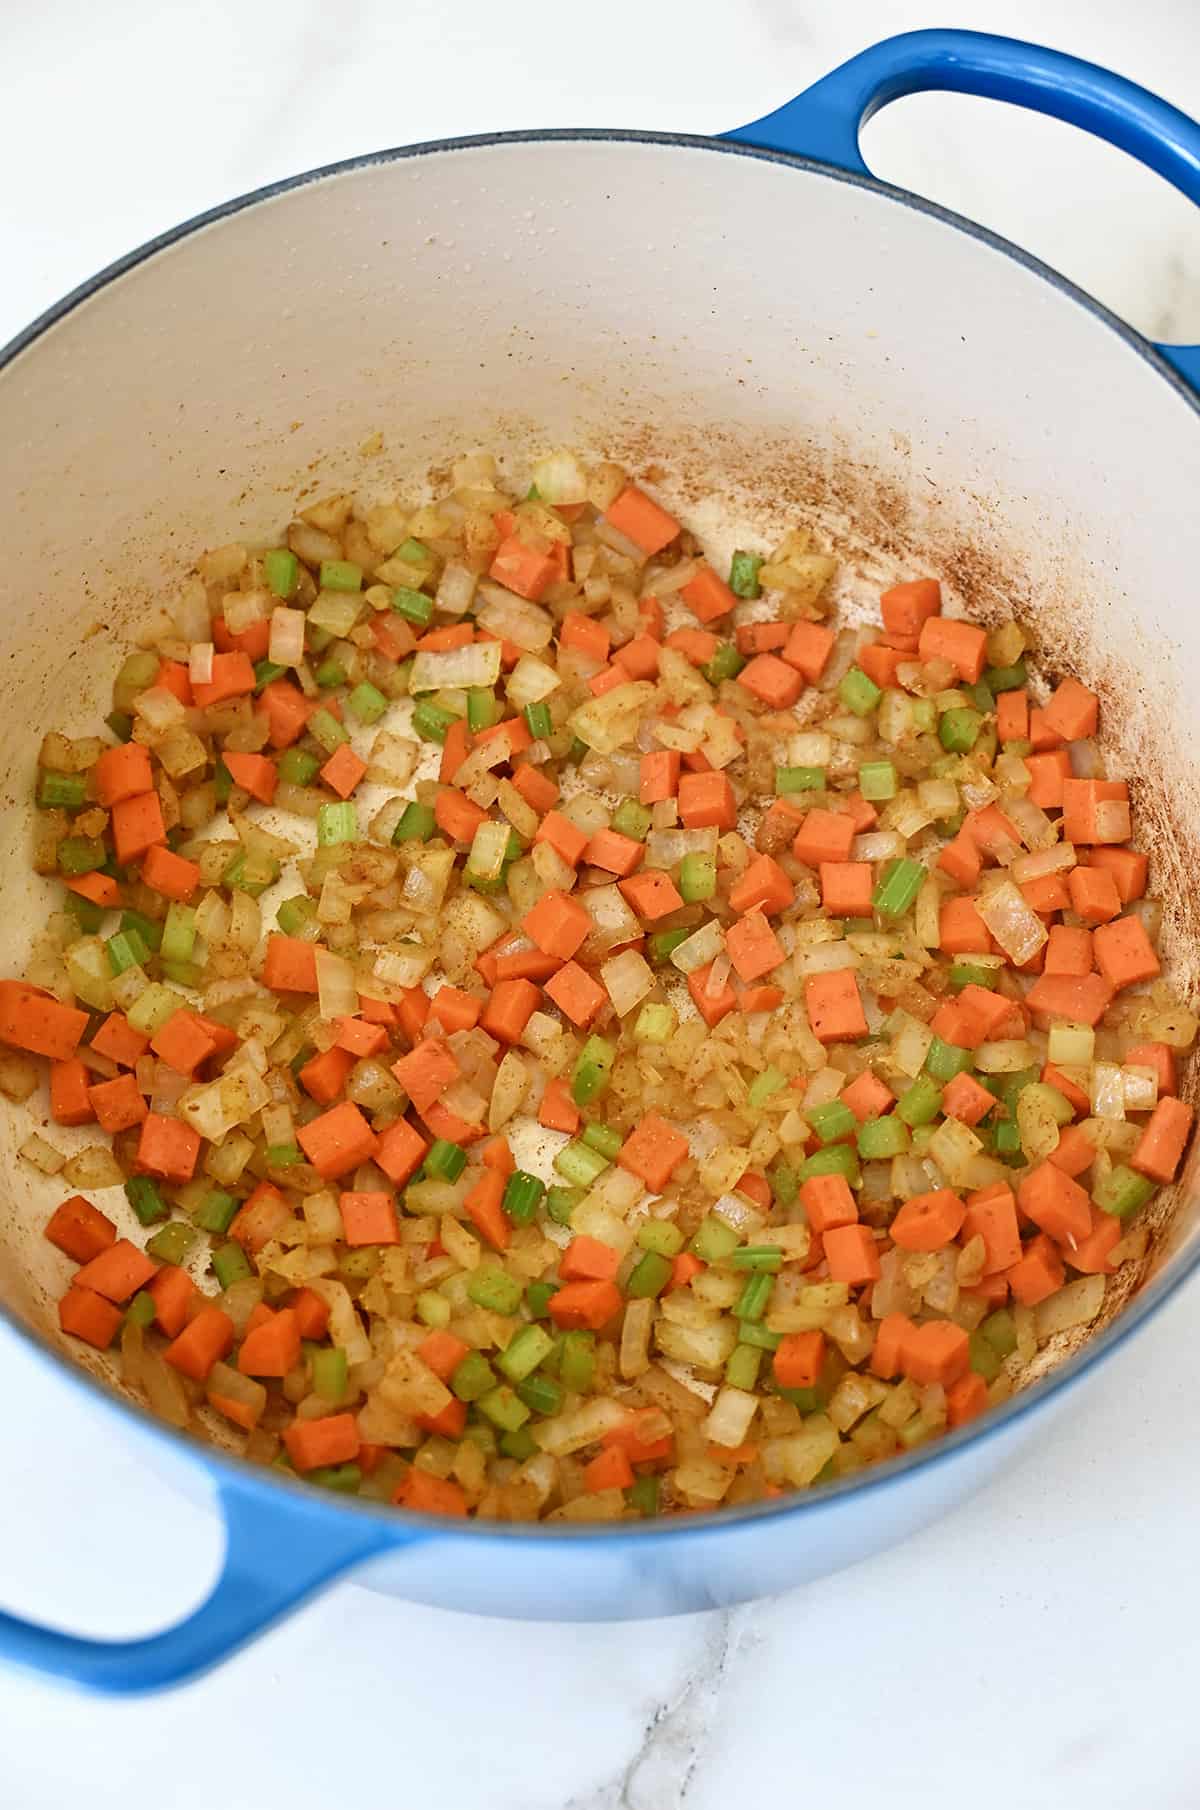 A dutch oven containing sautéed carrots, celery and pearl onions.